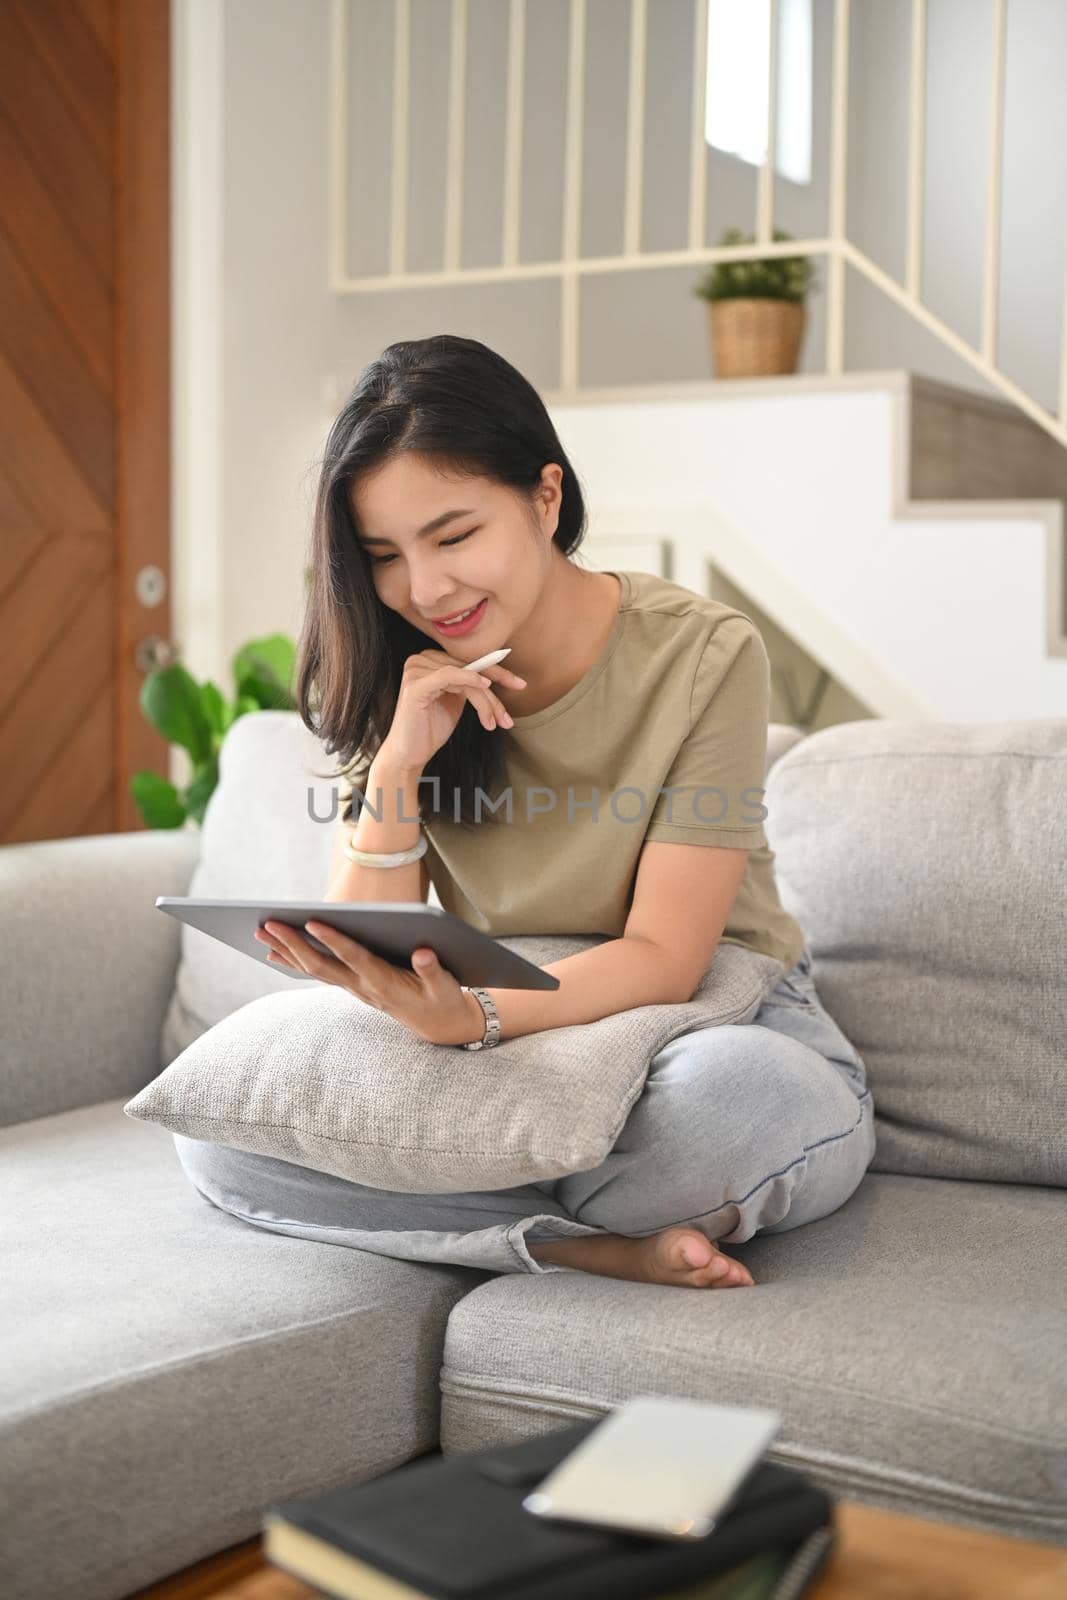 Smiling young woman resting on couch and browsing wireless internet on digital tablet. People, technology concept.